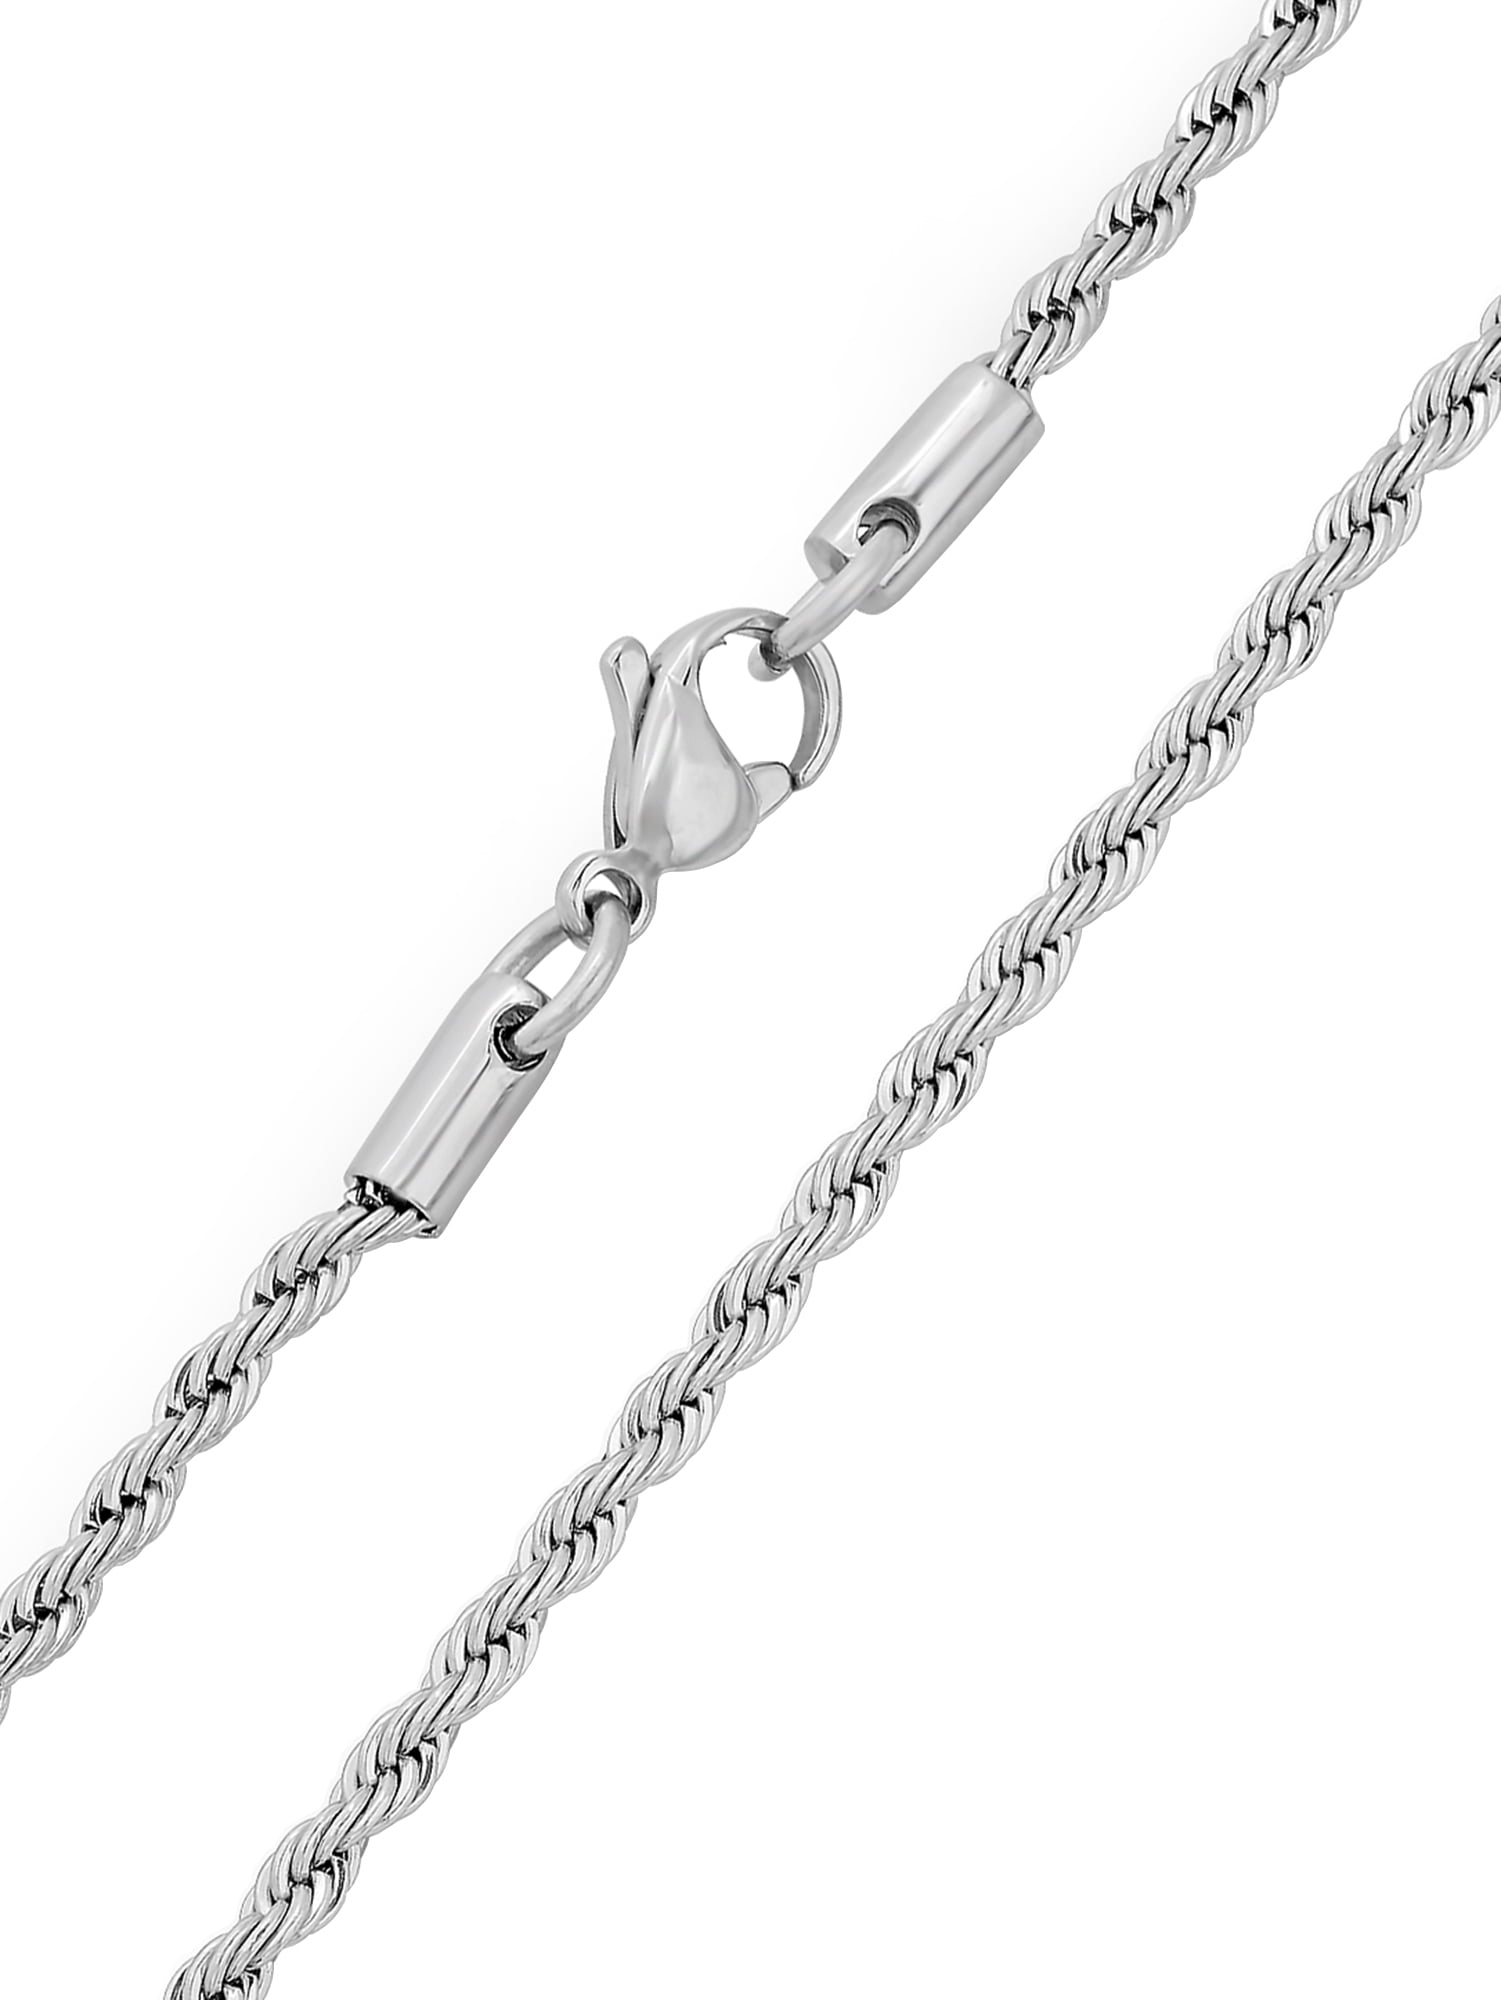 Hoisy Stainless Steel Chain for Men, Rope Chain Necklace Silver Lobster  Claw Rope Size 40CMx4MM Chain Men's Jewelry Gift